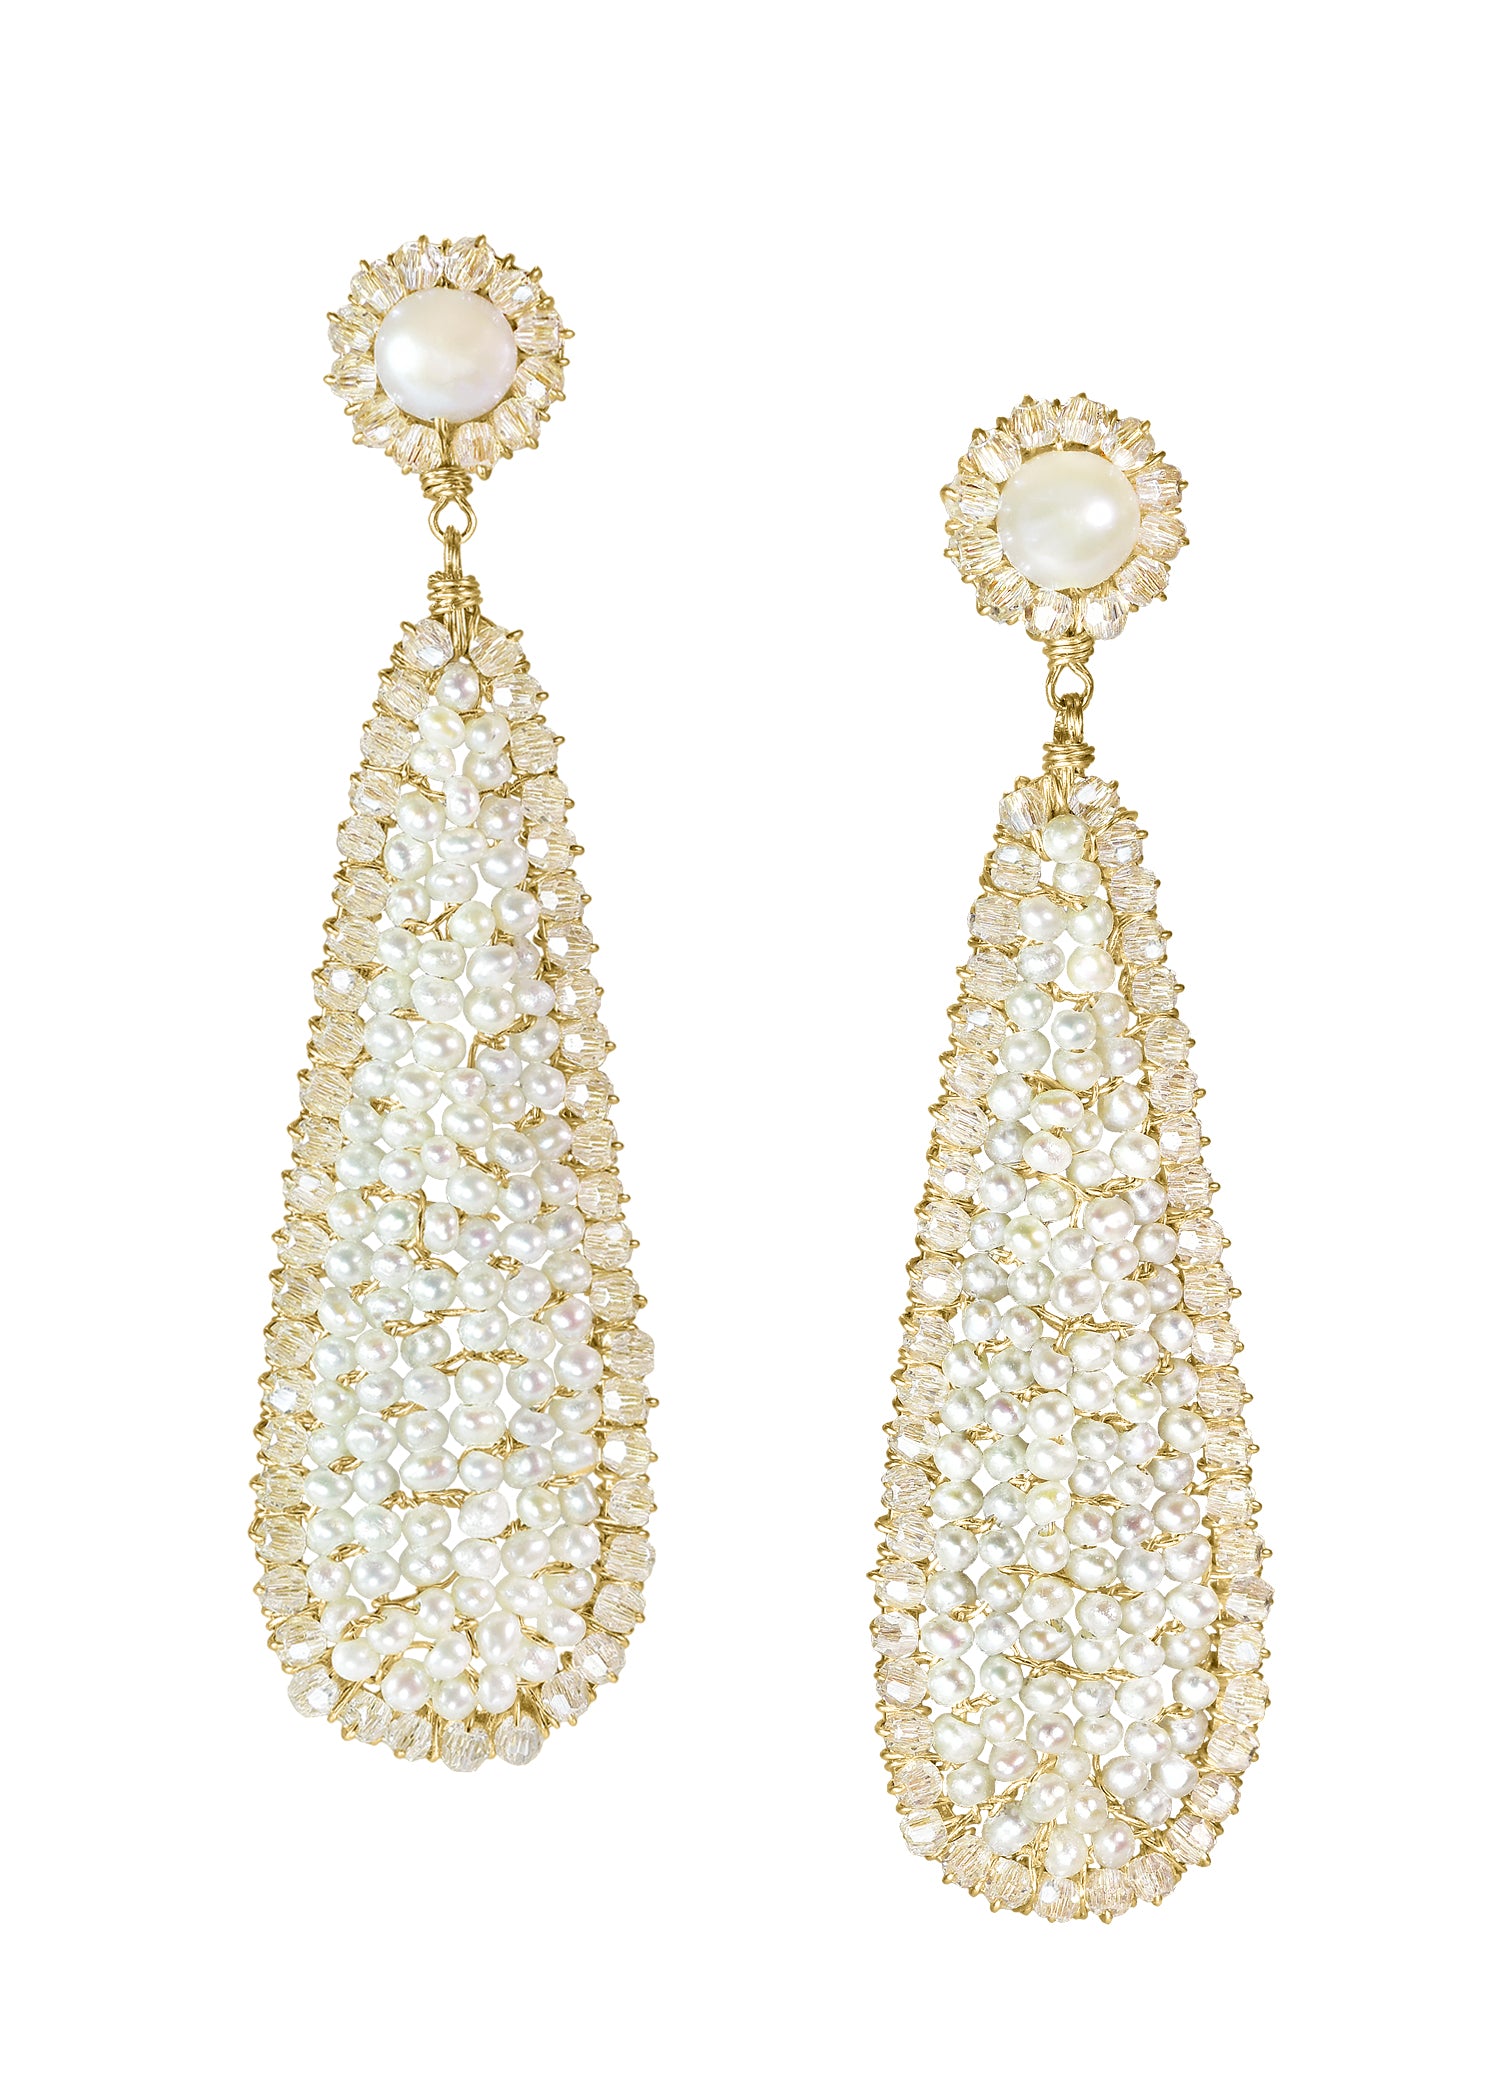 Crystal Freshwater pearl 14k gold fill Earrings measure 2" in length (including the posts) and 1/2" in width at the widest point. Post measures 3/8" in diameter Handmade in our Los Angeles studio